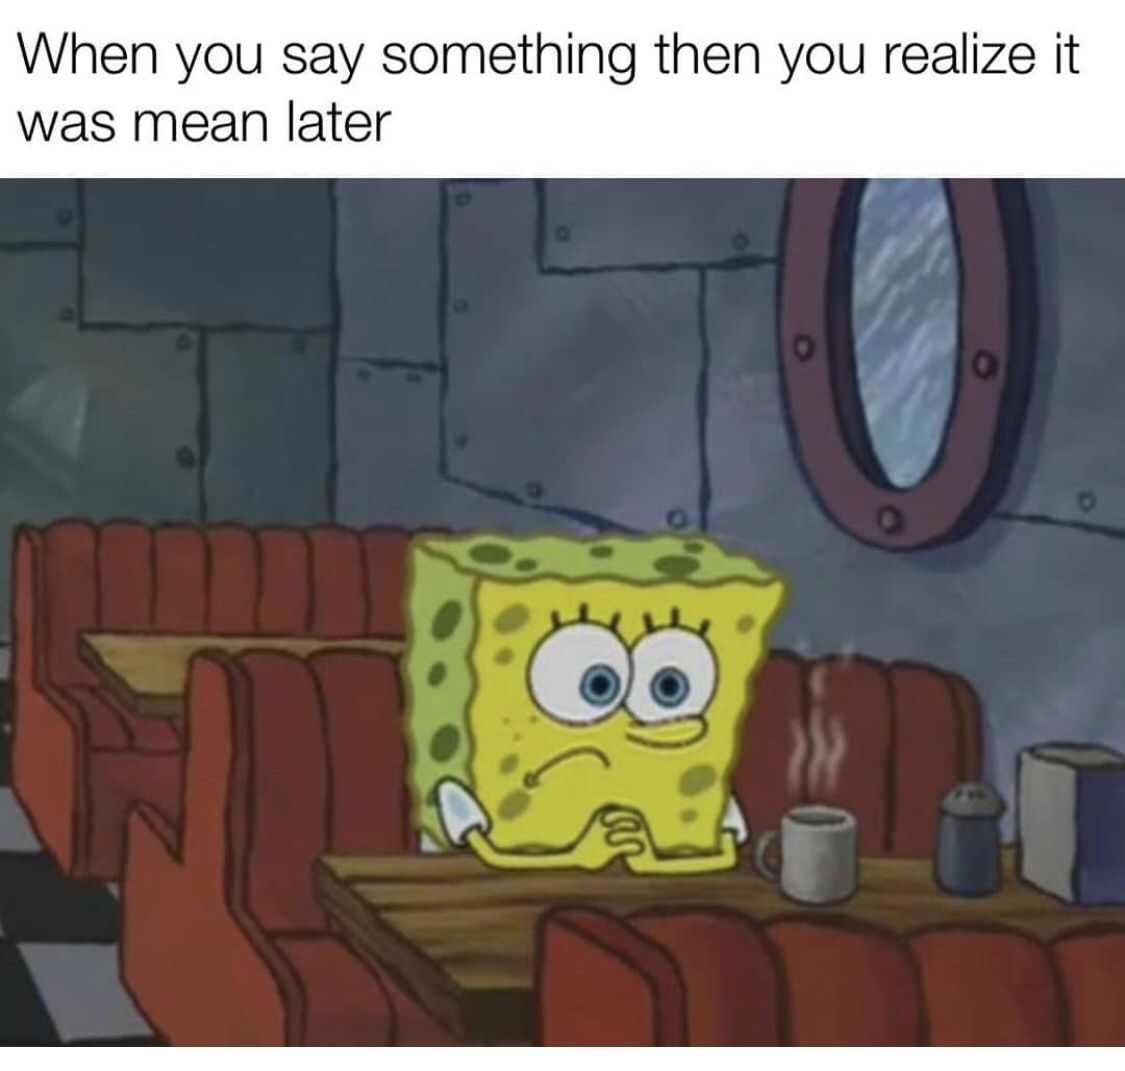 spongebob crisis meme - When you say something then you realize it was mean later